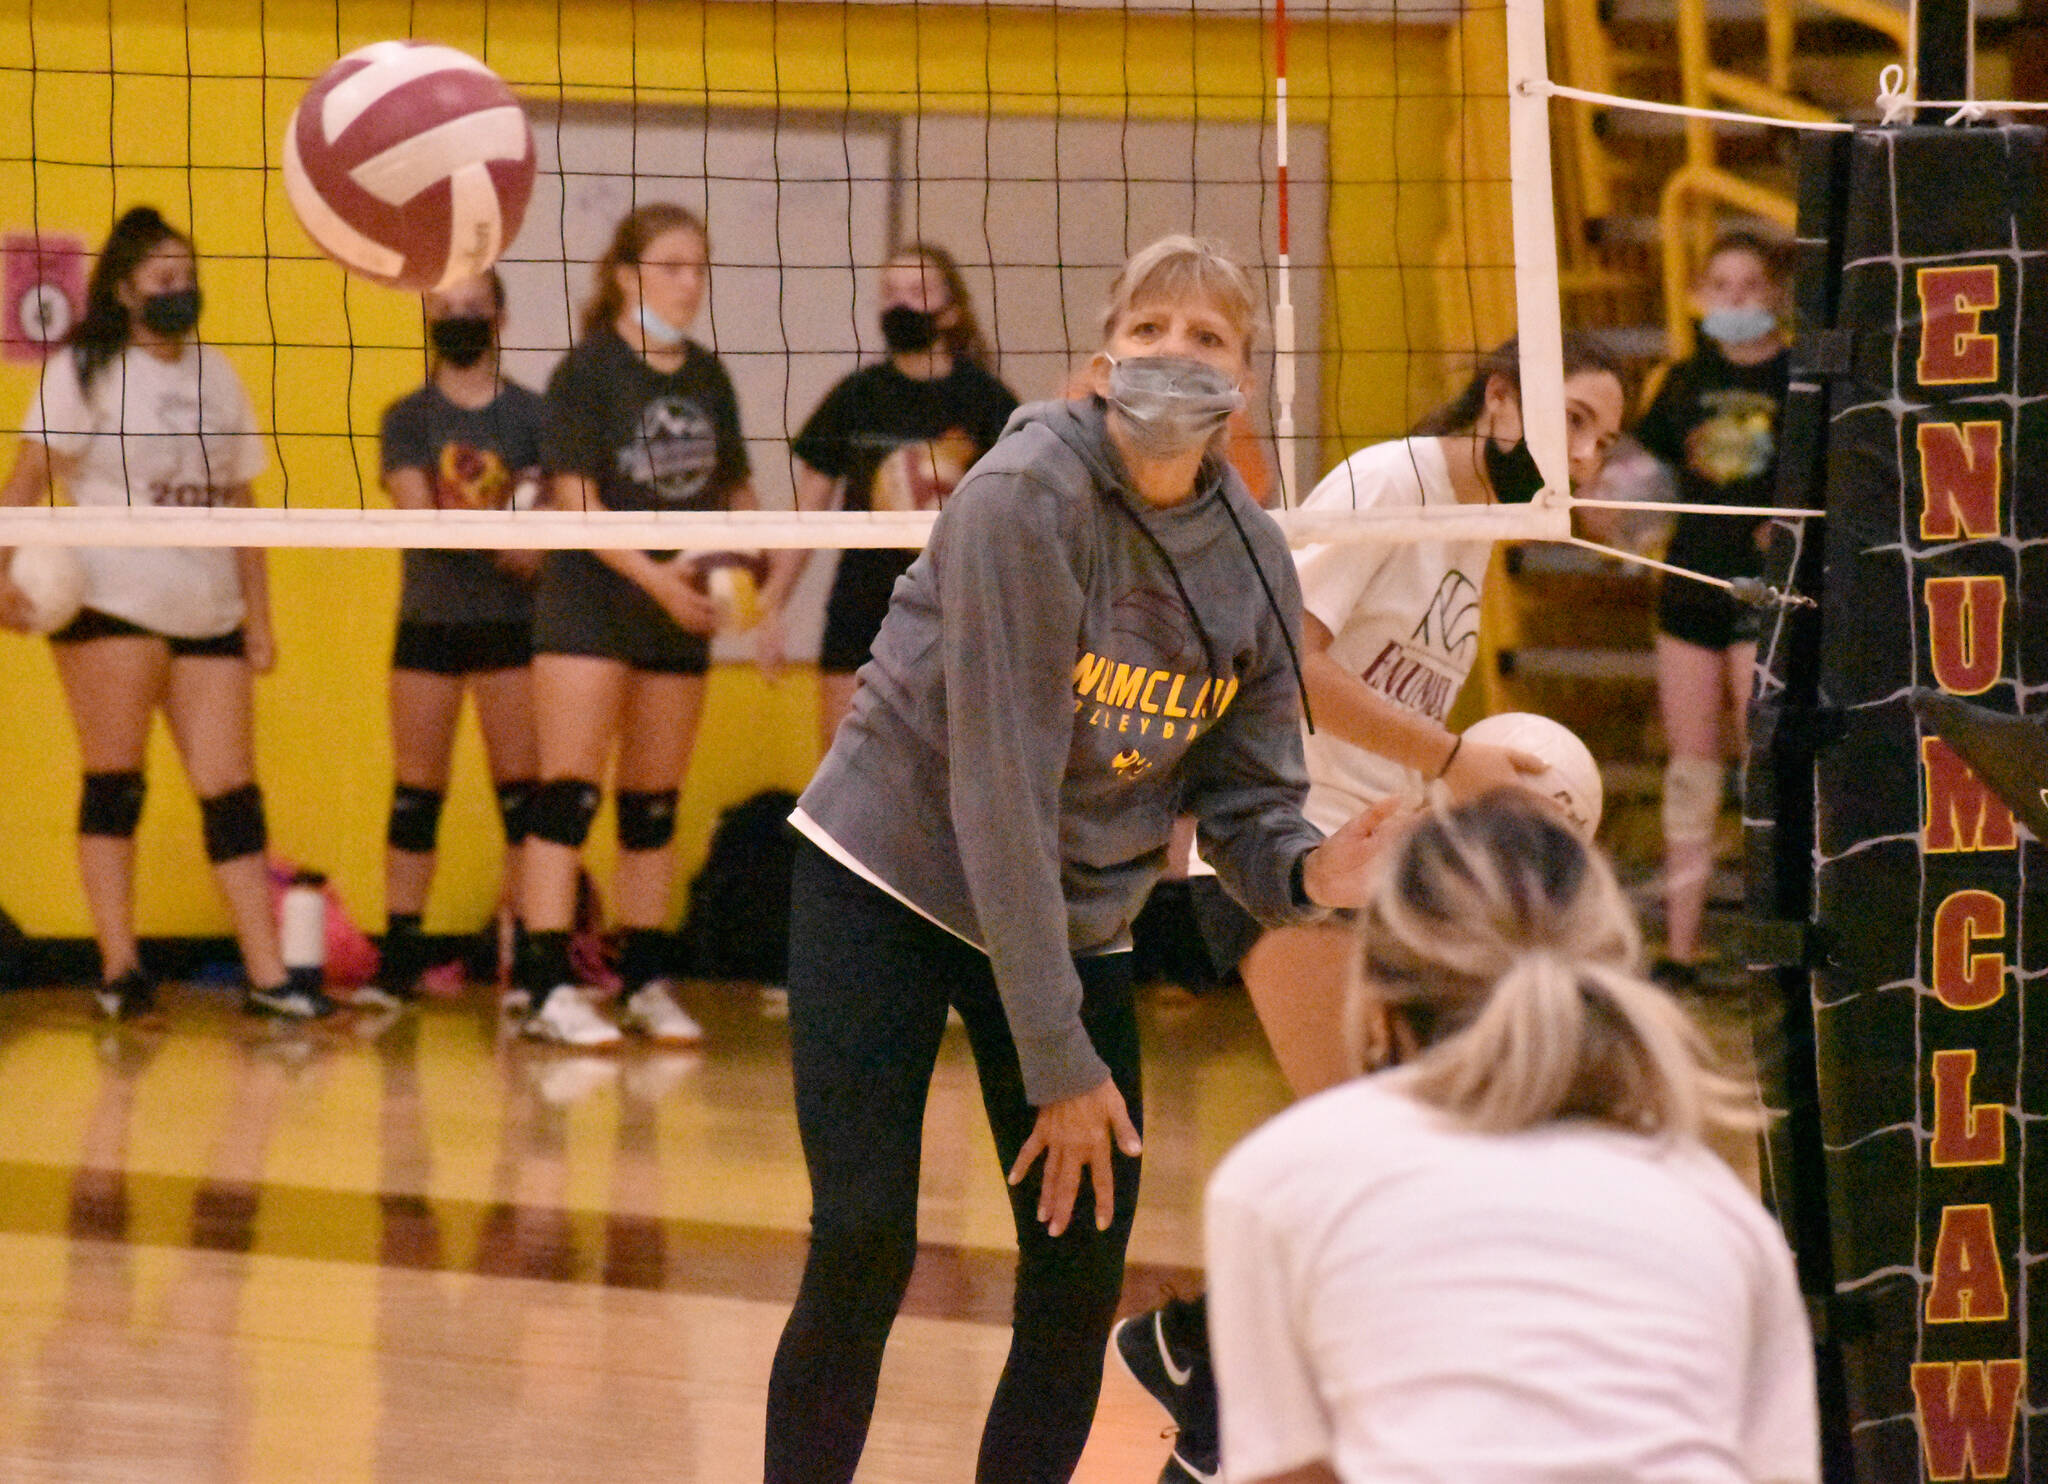 PHOTOS BY KEVIN HANSON
Fall coaches have been putting their squads through their early-season paces, all in preparation for the coming campaigns. Above, new soccer coach Mack Breeden supervises a scrimmage at White River; below, Enumclaw High volleyball coach Jackie Carel begins a drill.